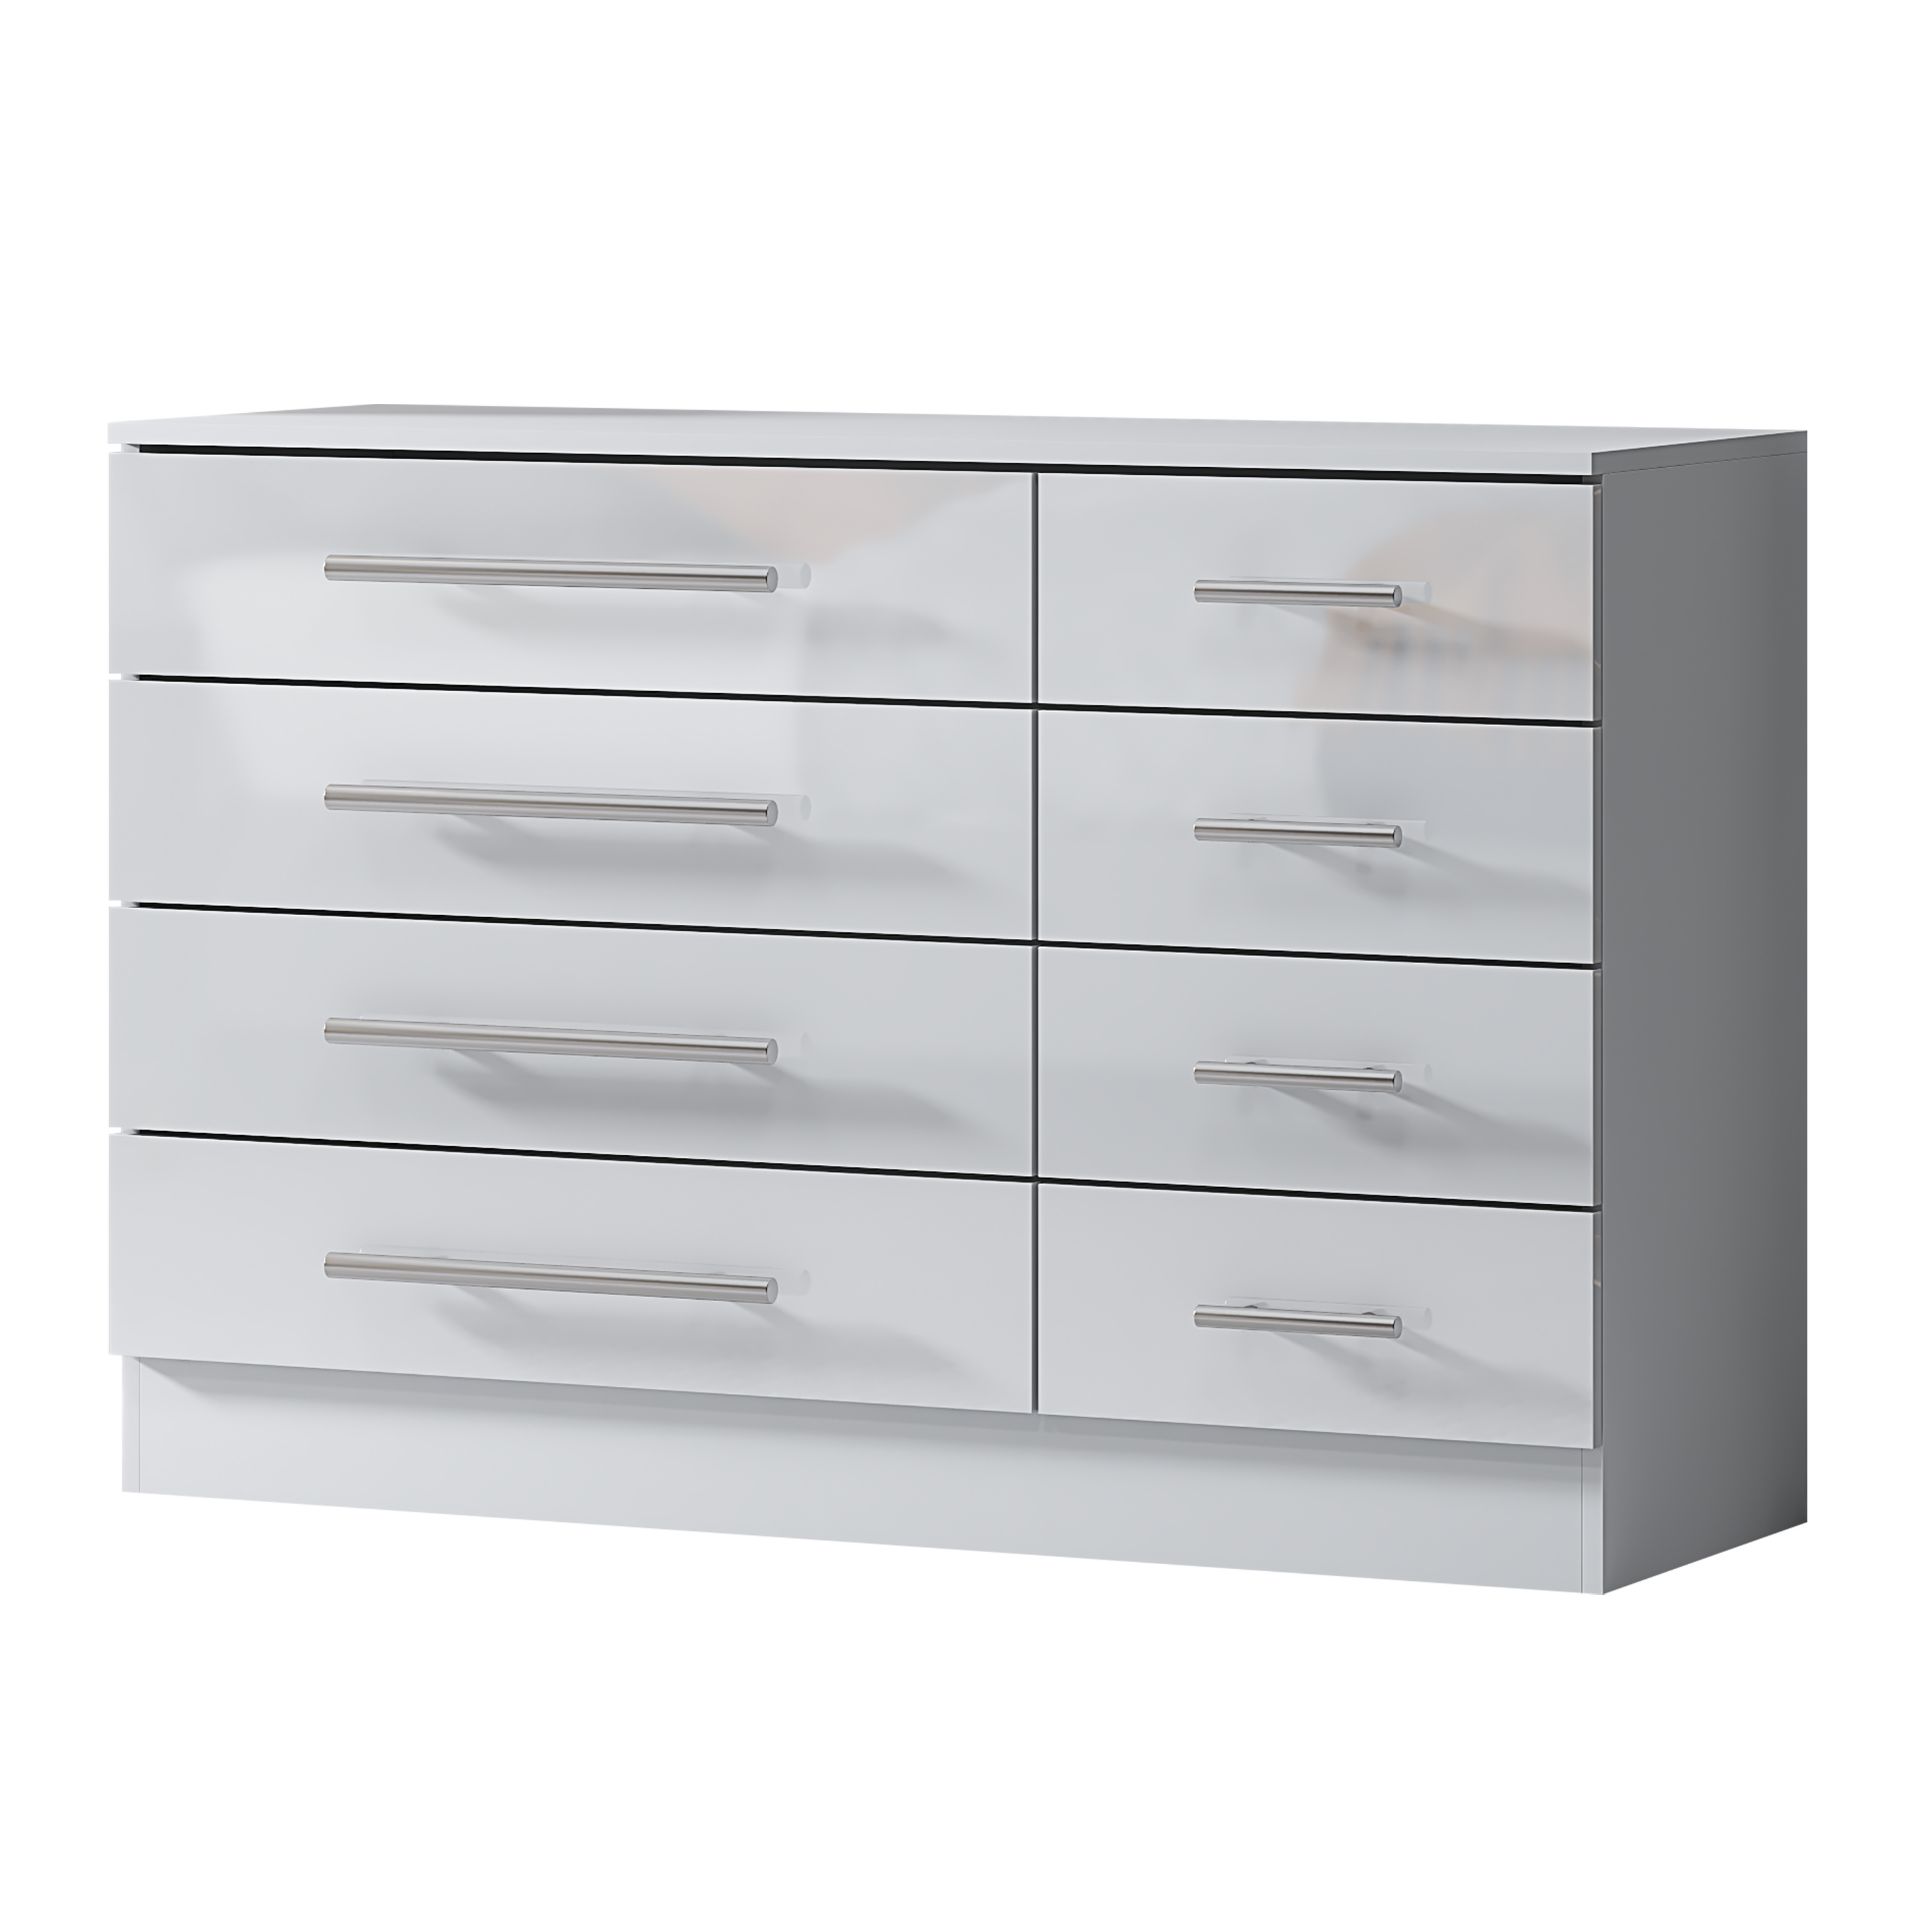 WHITE 8 DRAWER CHEST WITH HIGH GLOSS FRONTS AND METAL HANDLES